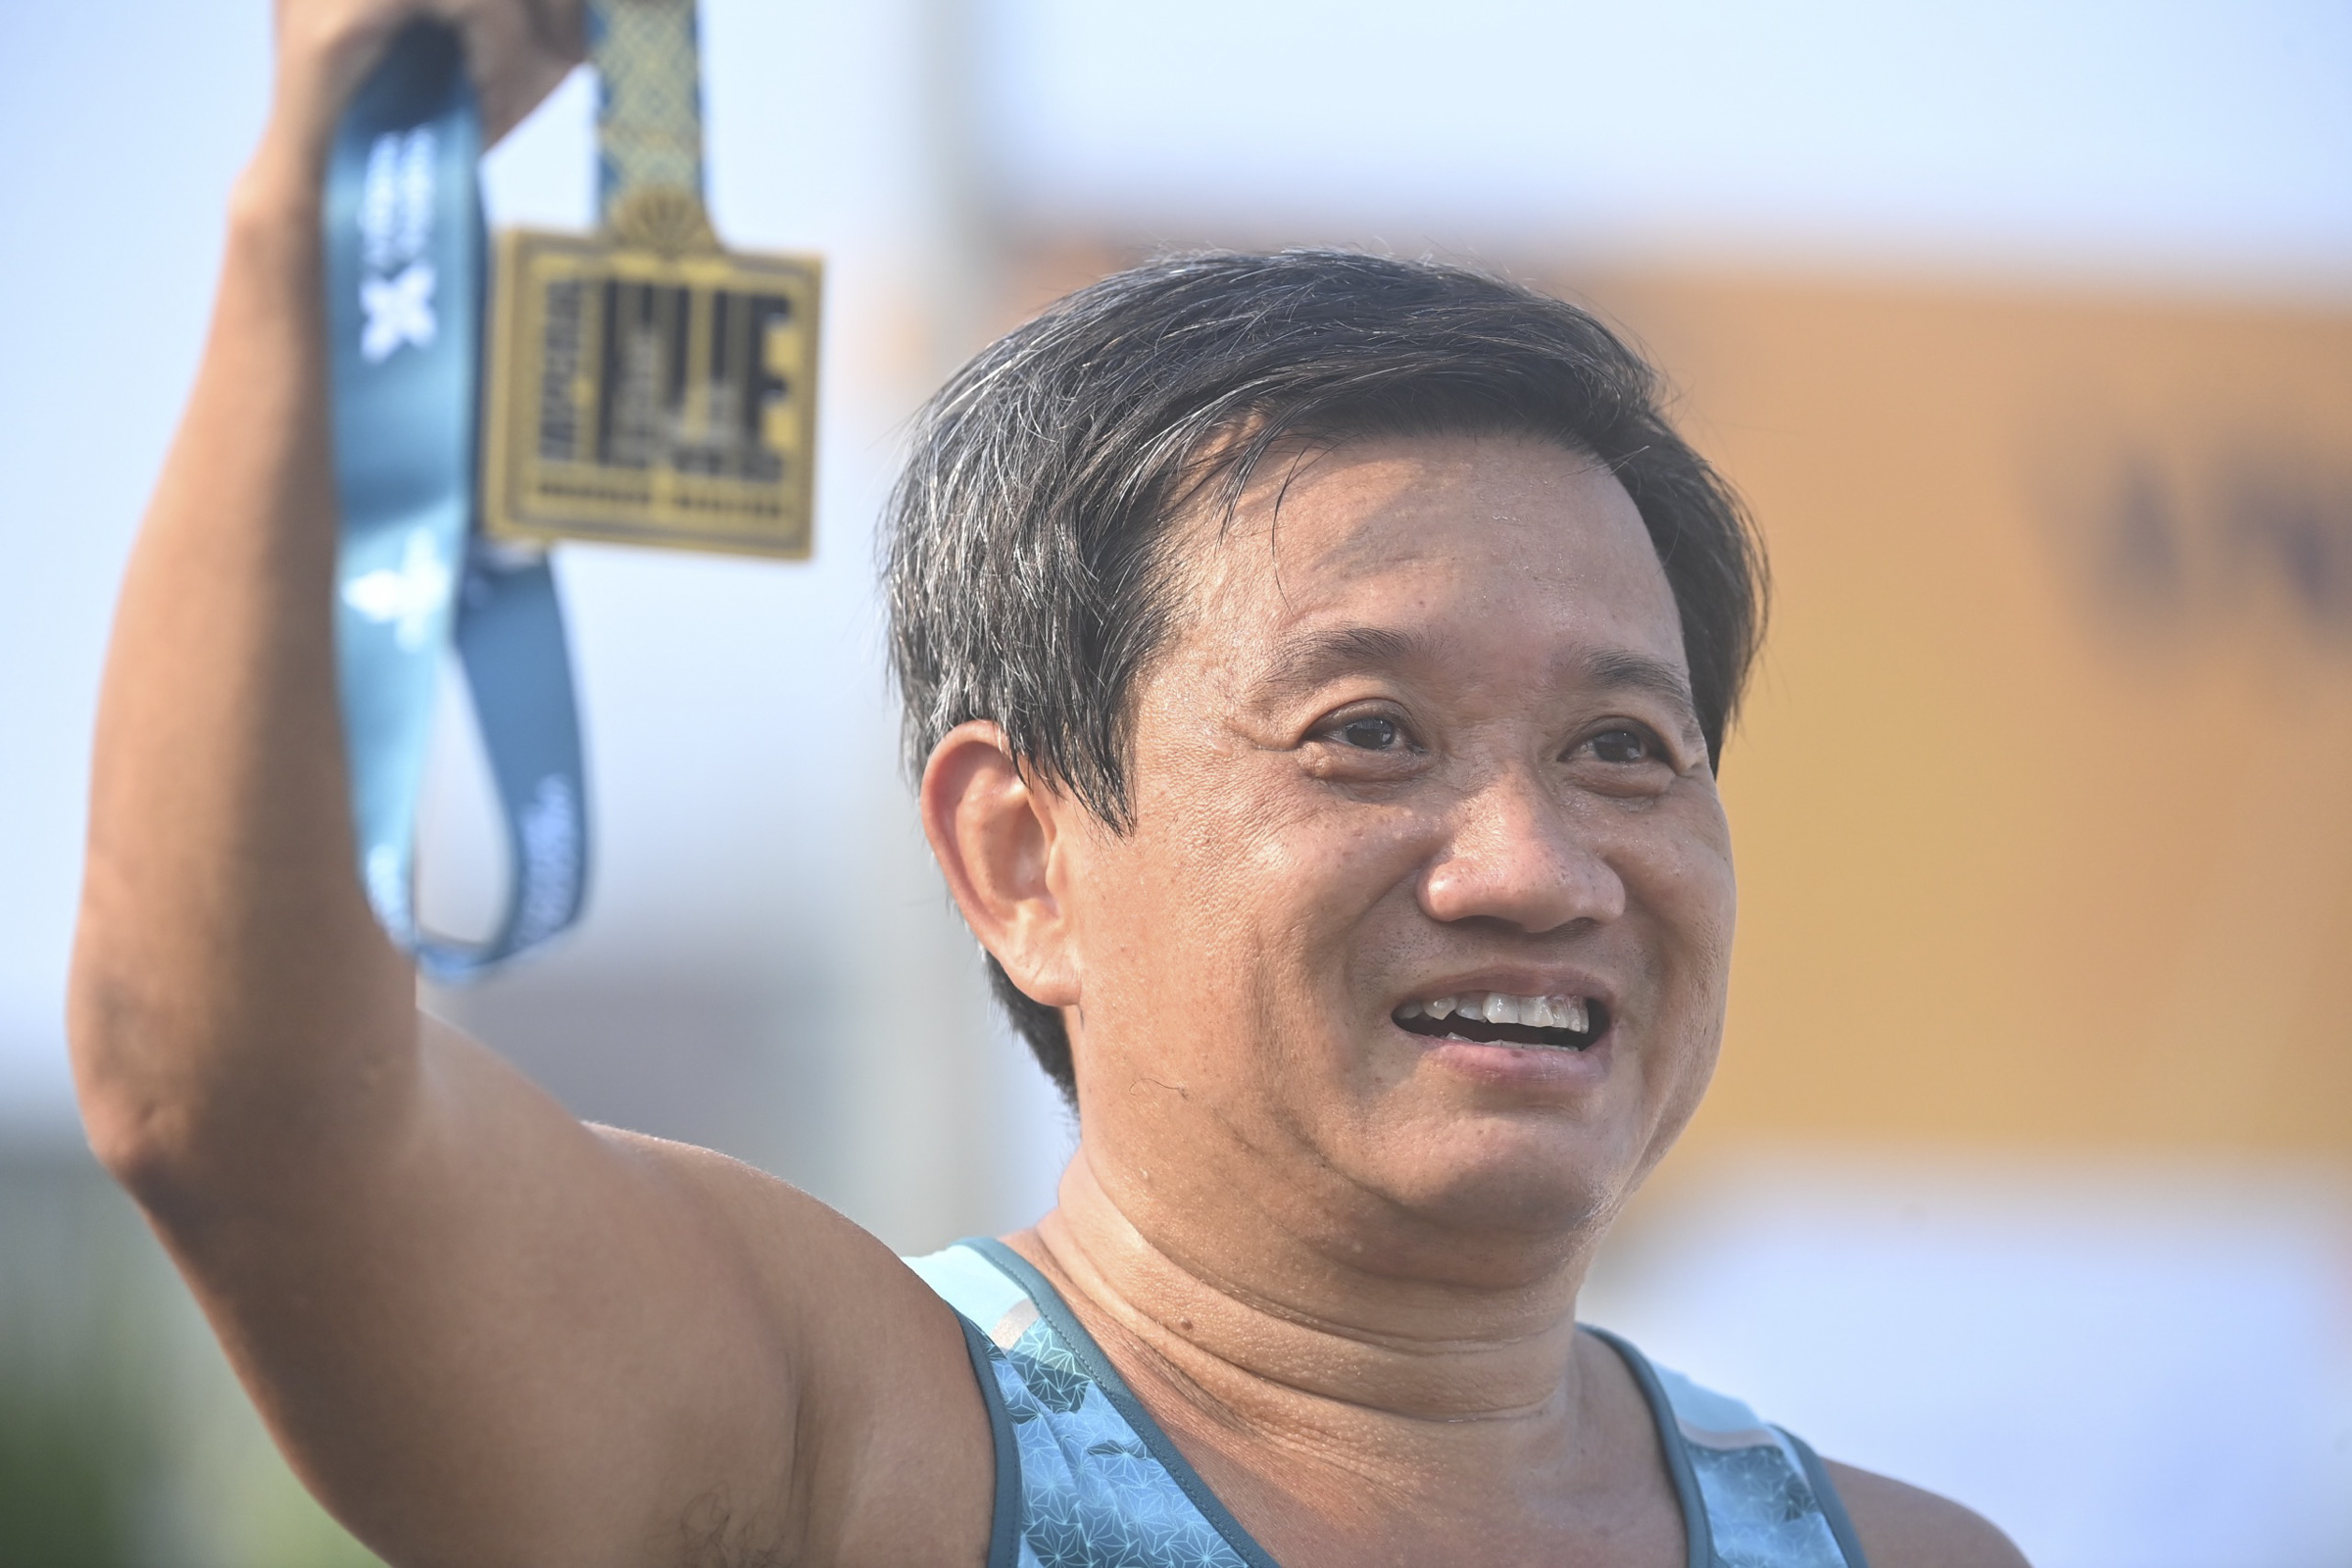 Doan Ngoc Hai wears a proud smile as he shows off the medal that confirms he has finished the full marathon - 42km.